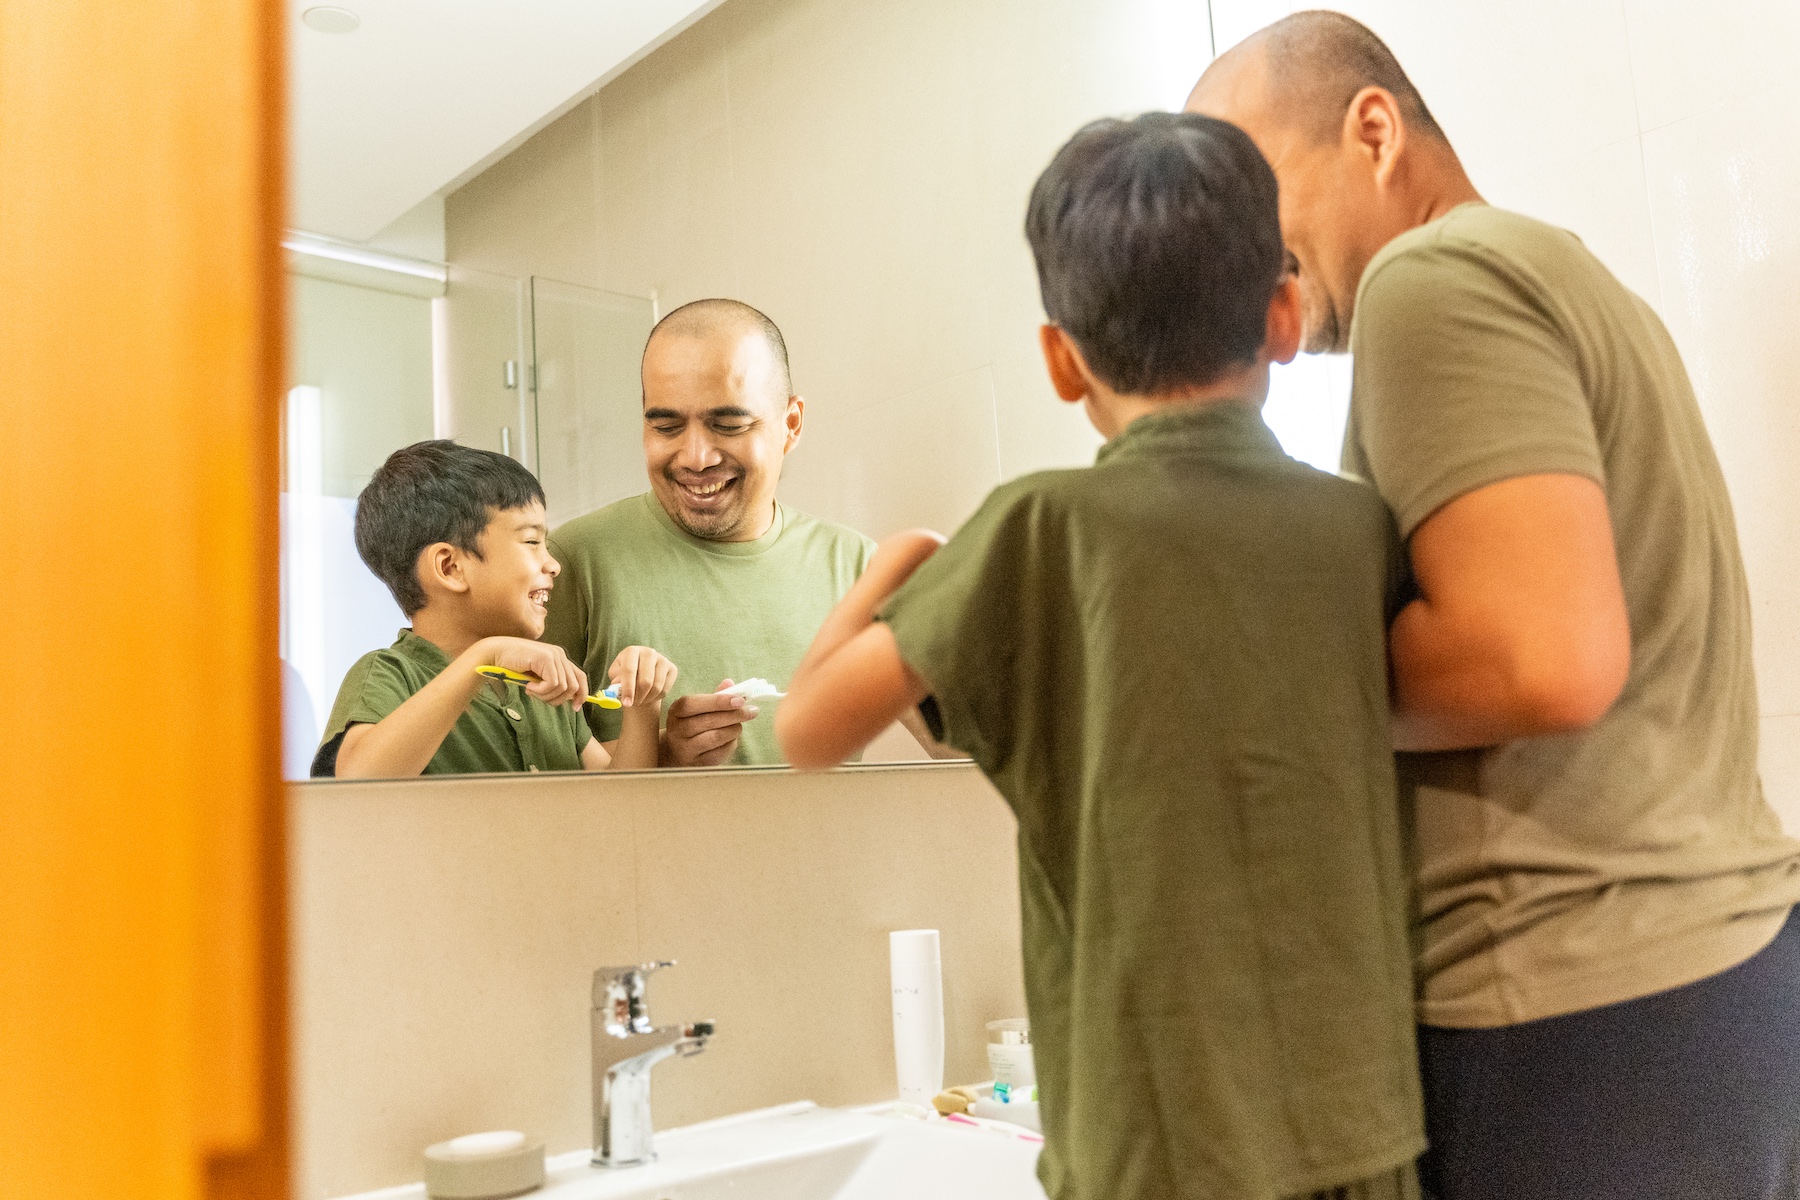 Father and son stand side-by-side brushing their teeth in the bathroom
